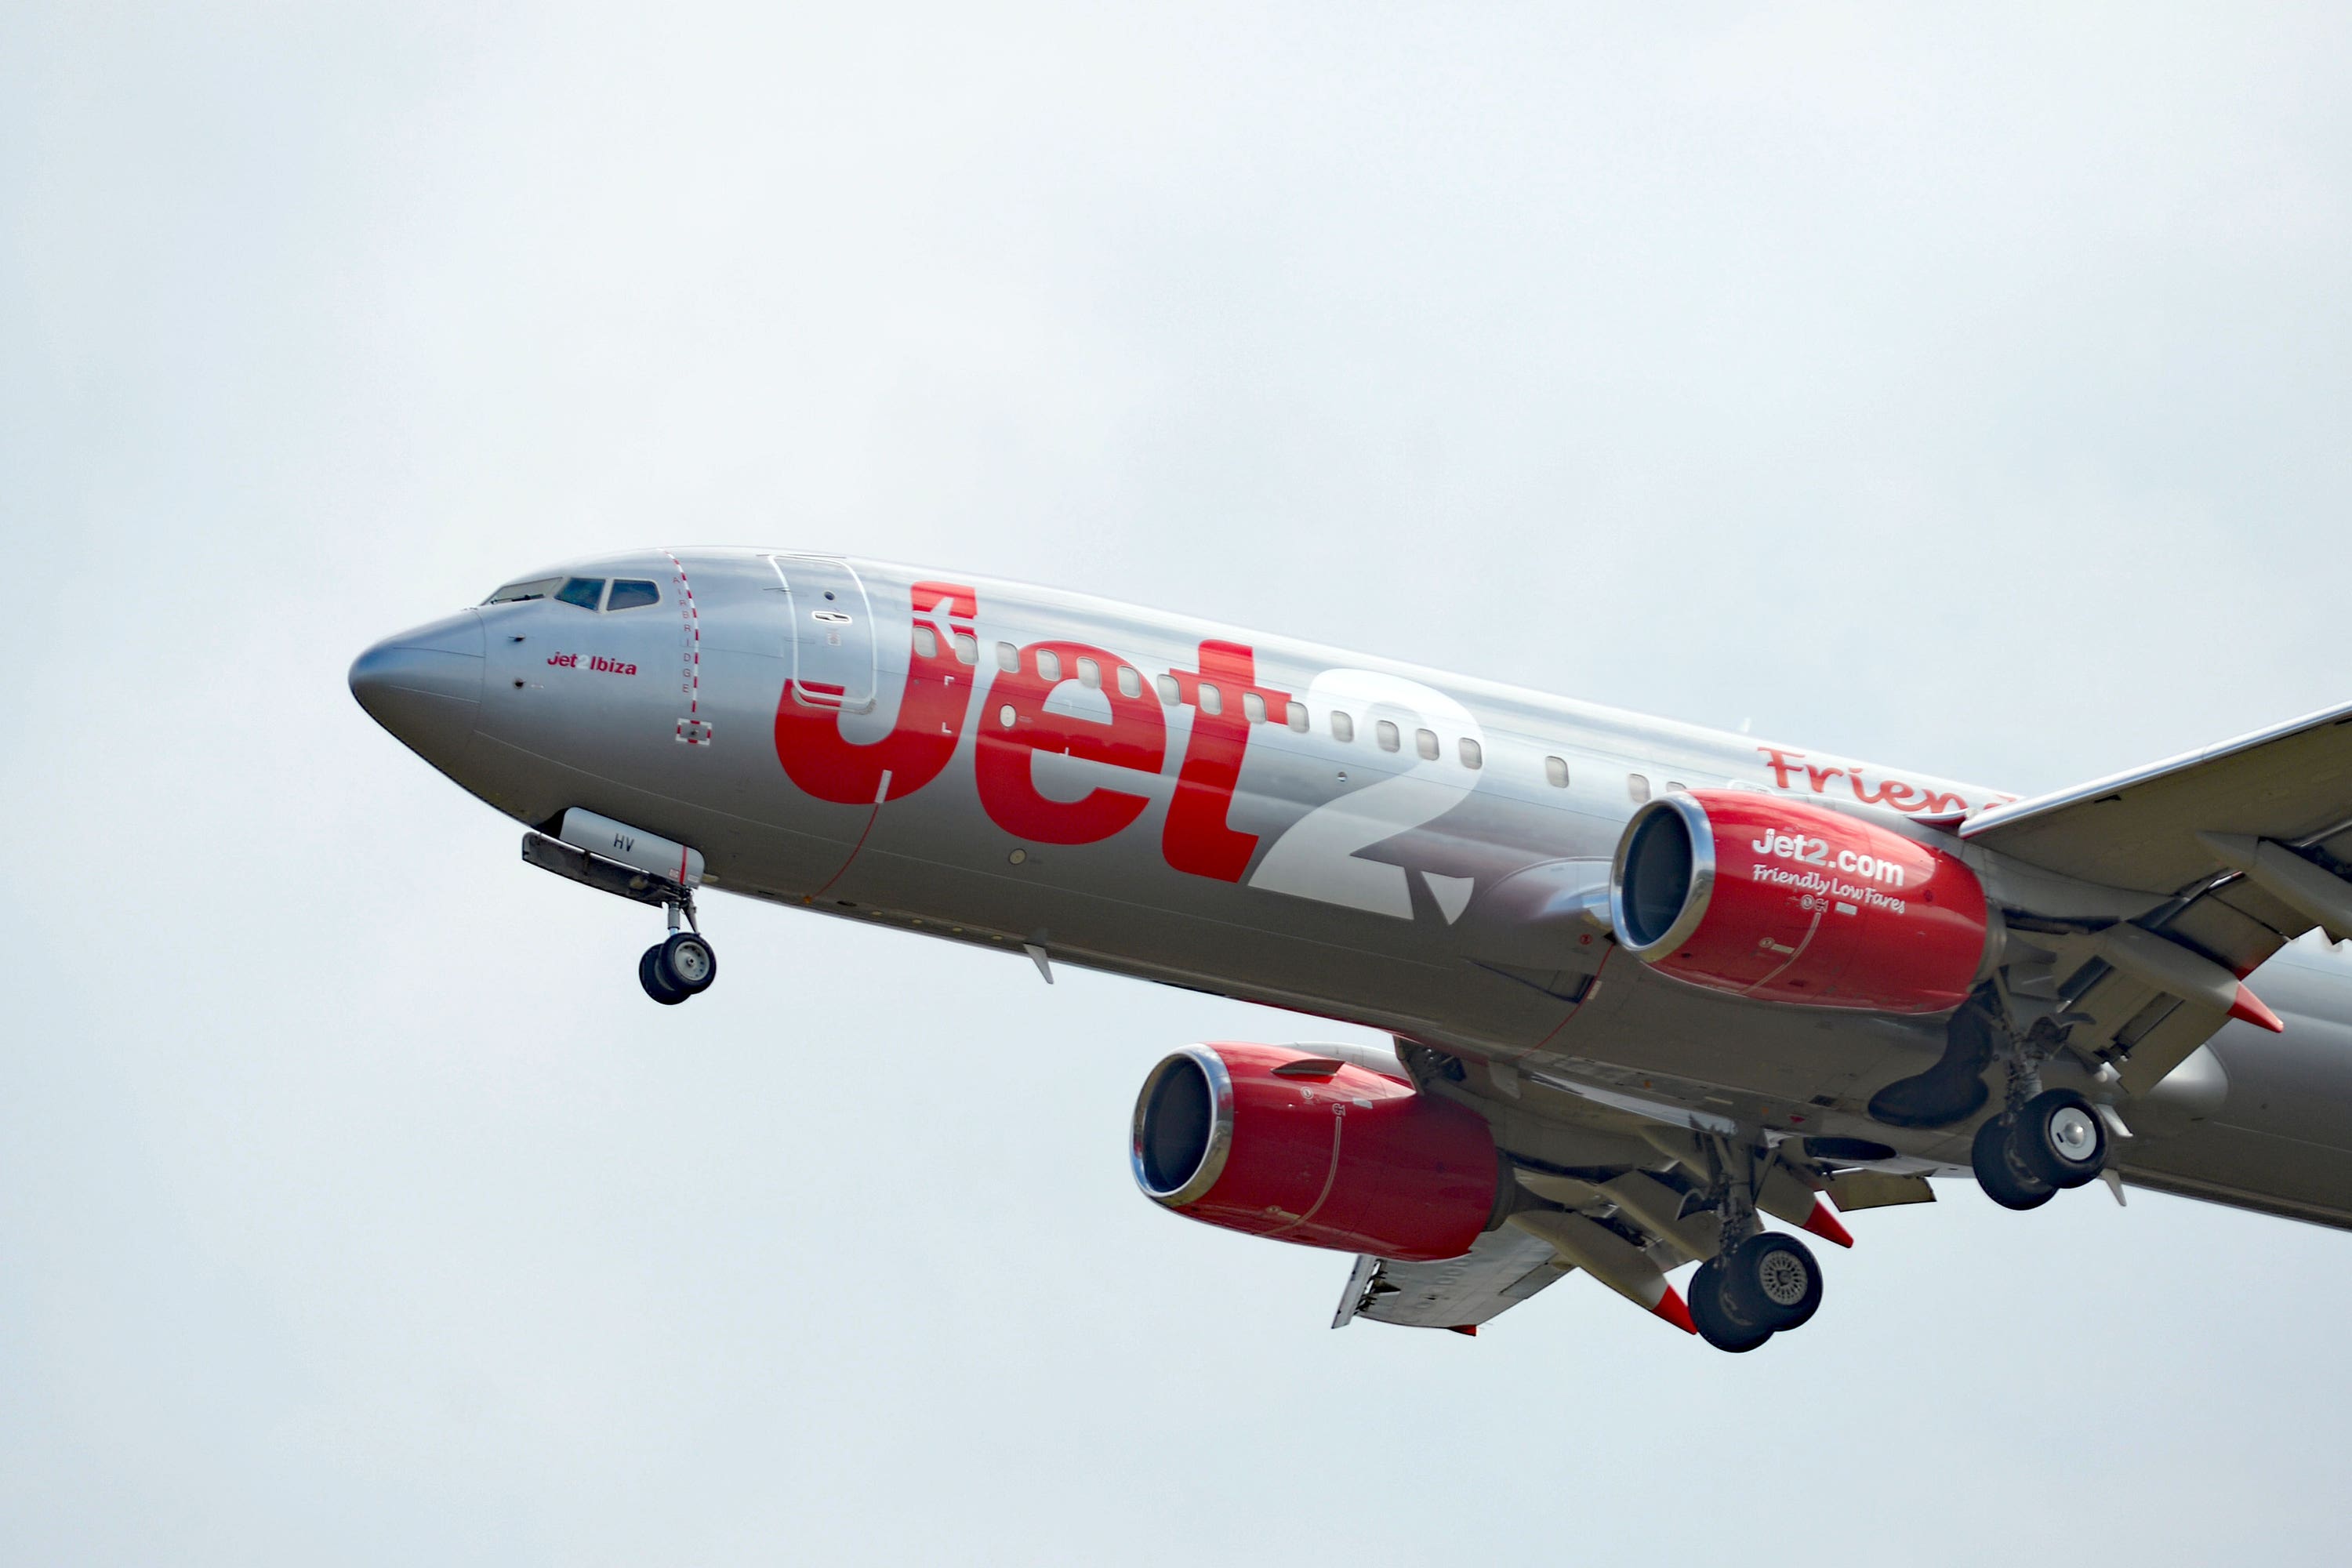 Holiday group Jet2 has revealed a hit of around £13 million from ‘significant’ disruption caused by the recent air traffic control (ATC) failure and wildfires across popular destination Rhodes (Nicholas T Ansell/PA)